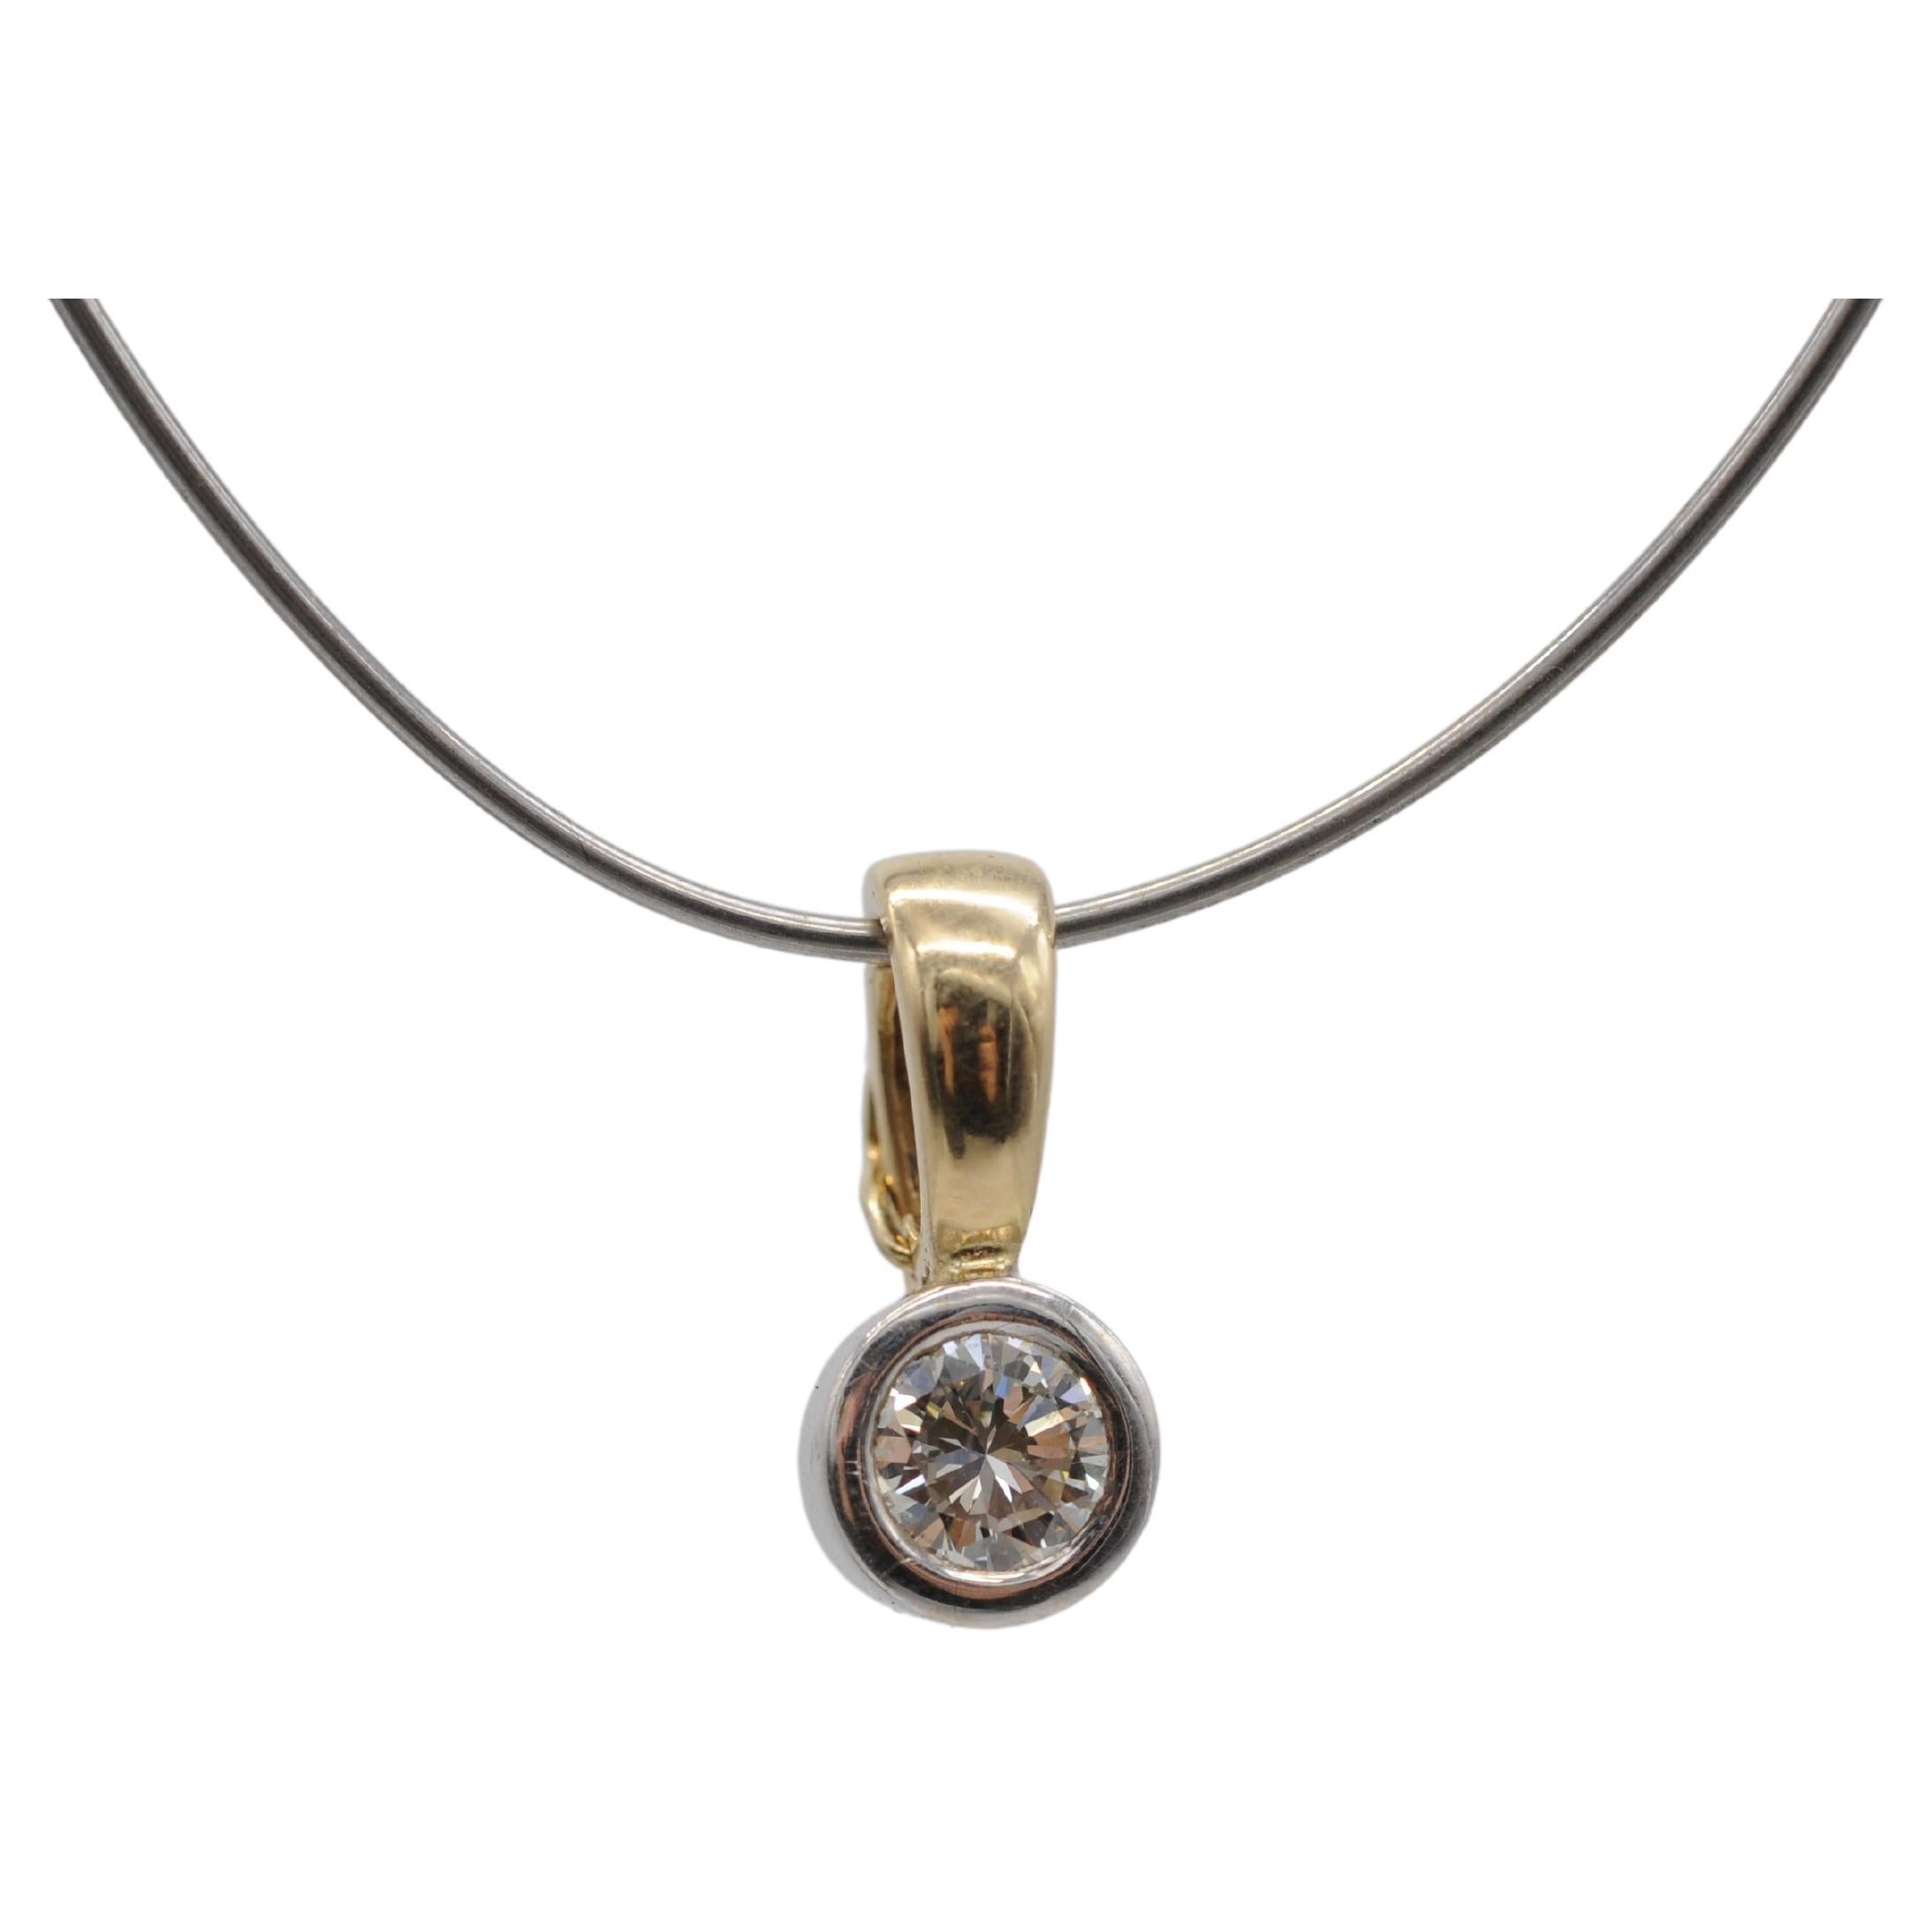  Diamond 0.75 ct. Pendant in 14k Gold 

Introducing a mesmerizing masterpiece: the exquisite 14k white and yellow gold pendant adorned with a breathtaking 0.75 carat diamond cut in the brilliant round style. This stunning pendant embodies the